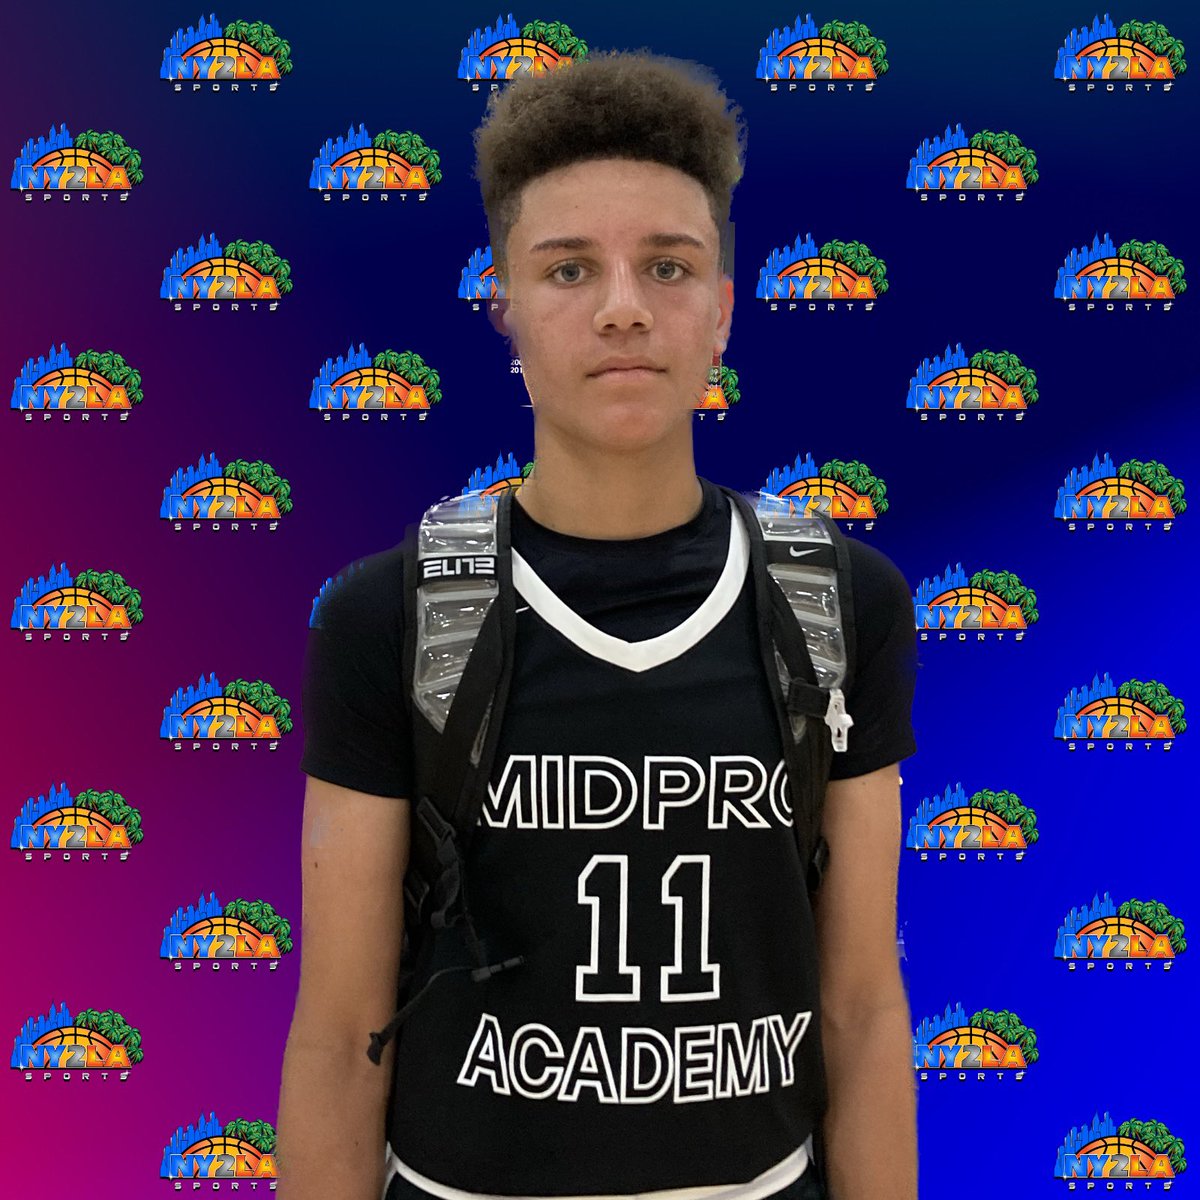 Kayden Turner was one of the top guards on the @GNBABASKETBALL last year and has only continued to grow his game plus add some size and length. Skilled playmaking guard who can really score & distribute it. @MidProAcademy @ny2lasports